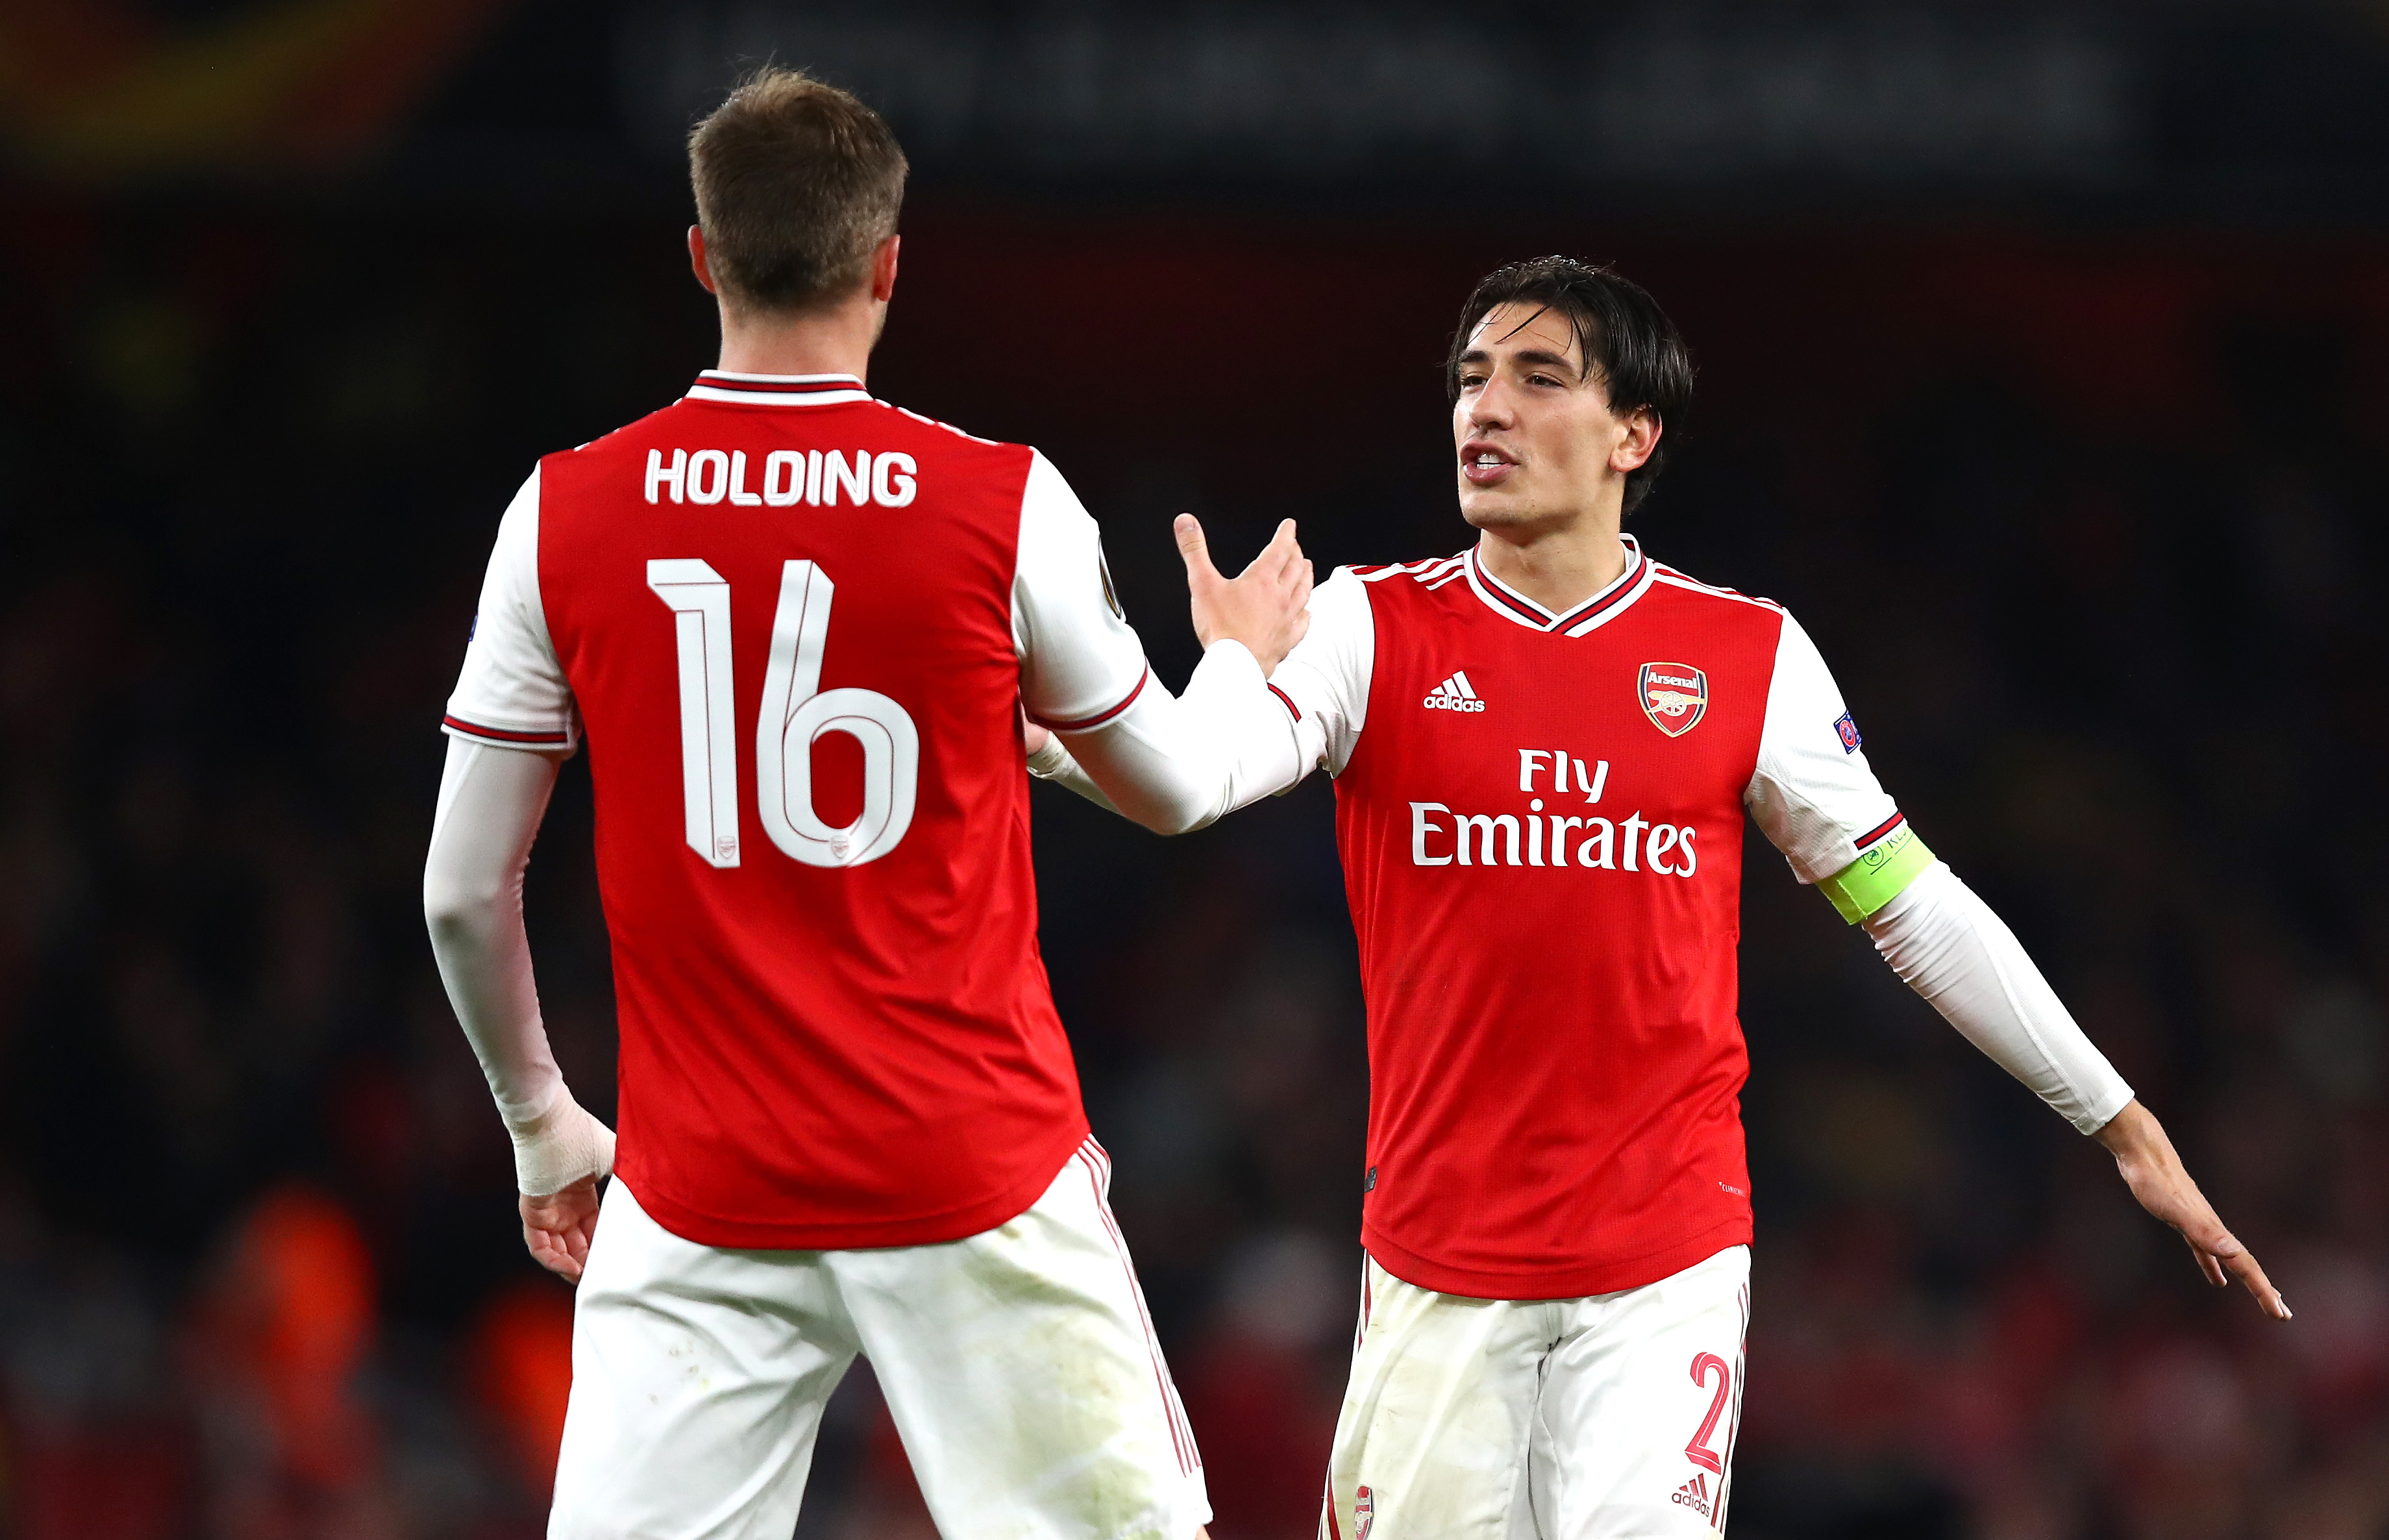 LONDON, ENGLAND - OCTOBER 03: Hector Bellerin of Arsenal celebrates victory with Rob Holding of Arsenal following the UEFA Europa League group F match between Arsenal FC and Standard Liege at Emirates Stadium on October 03, 2019 in London, United Kingdom. (Photo by Julian Finney/Getty Images)